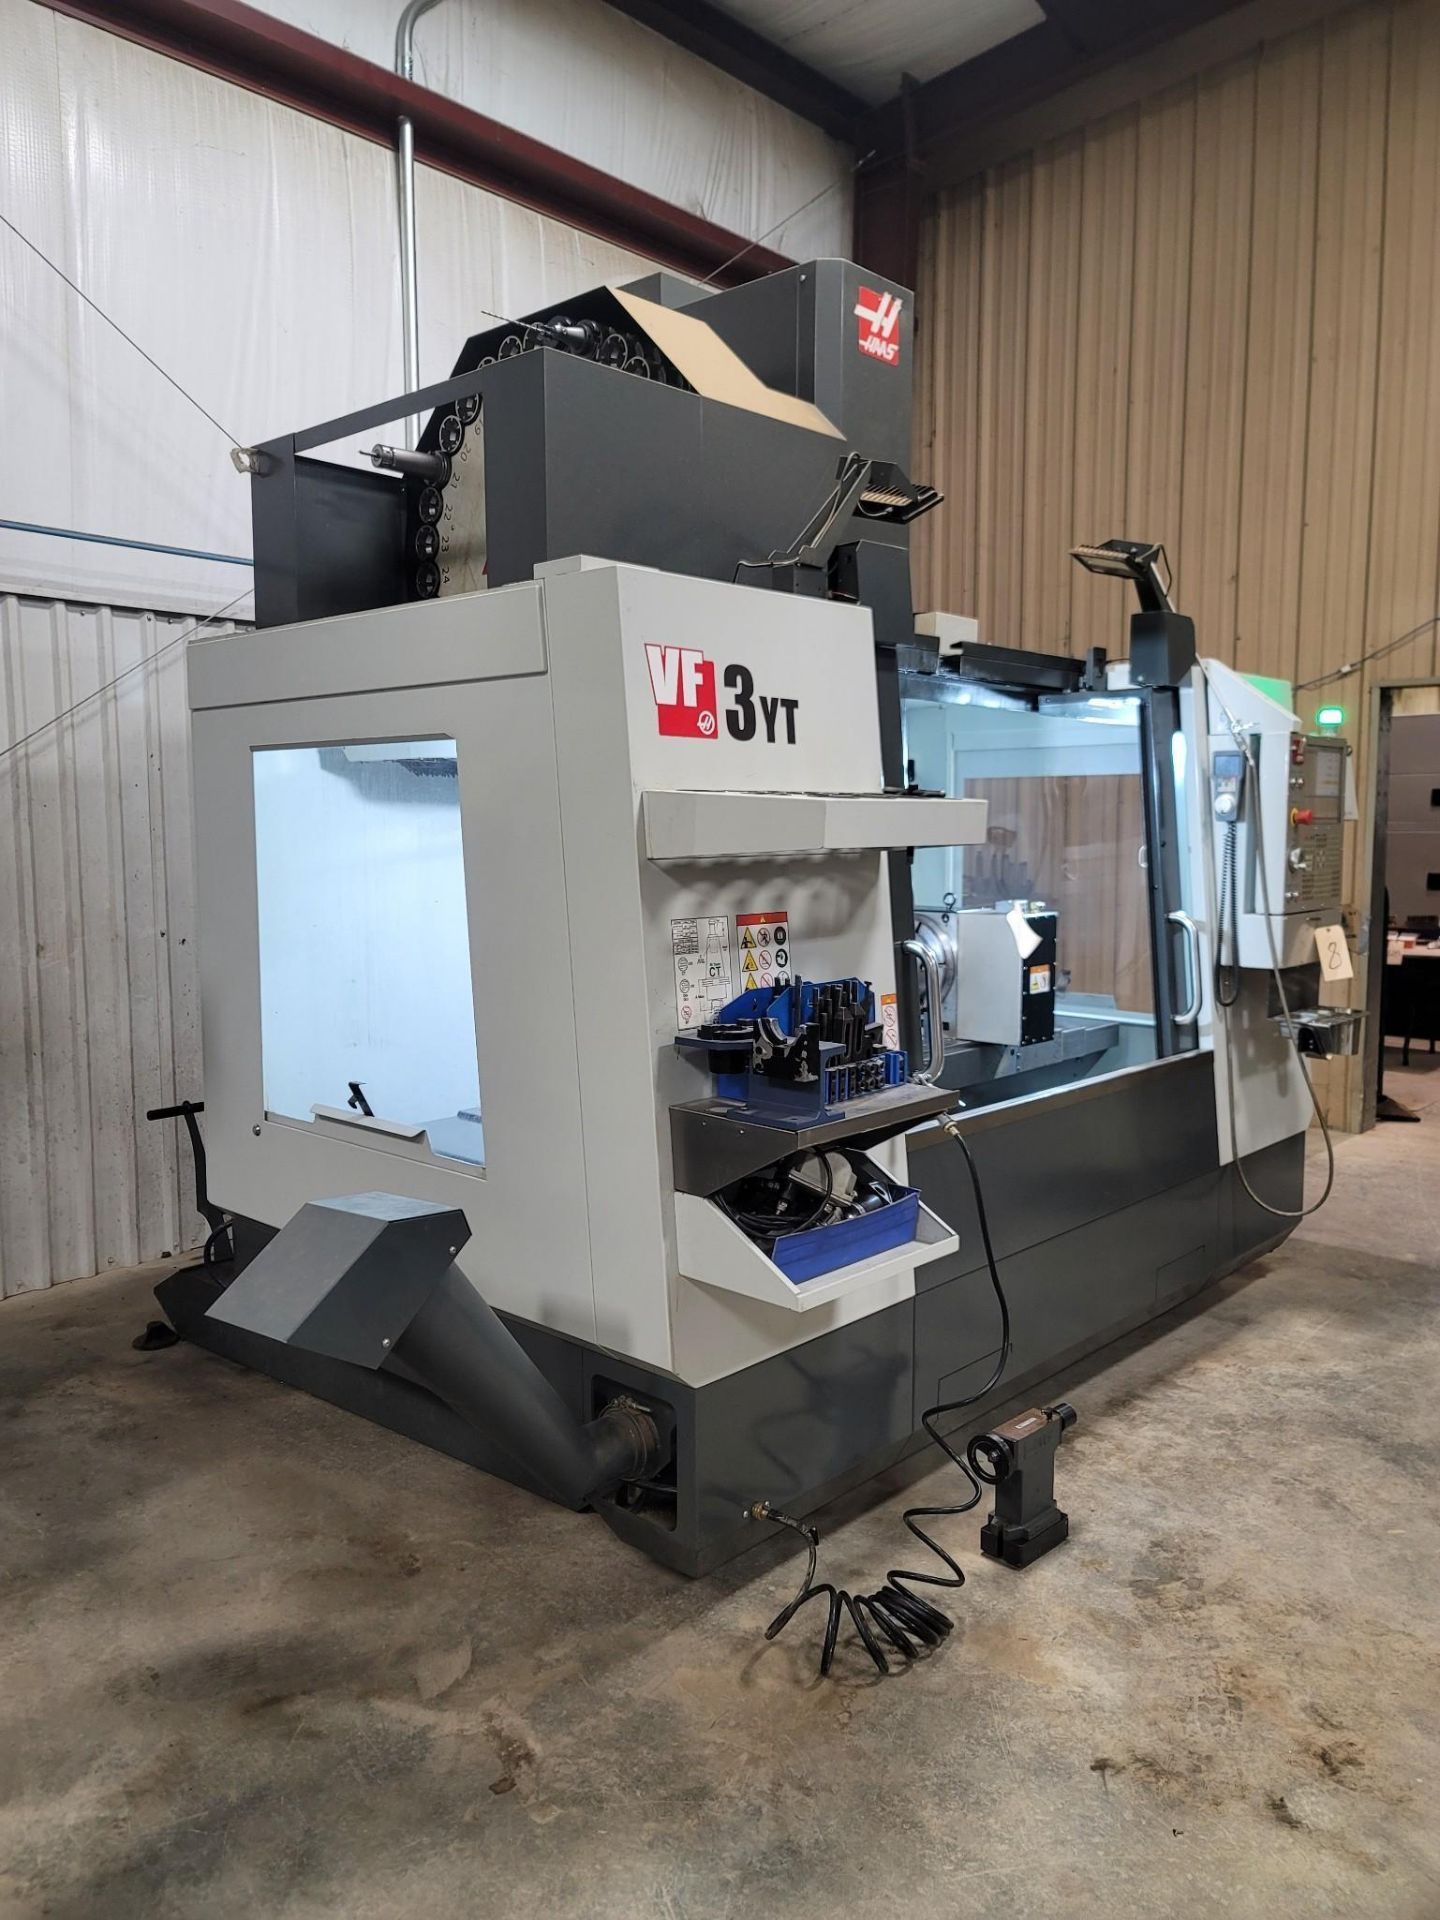 2019, Haas VF 3YT/ 50 Vertical Machining Center, VMC, S/N 1167708 - Image 10 of 42